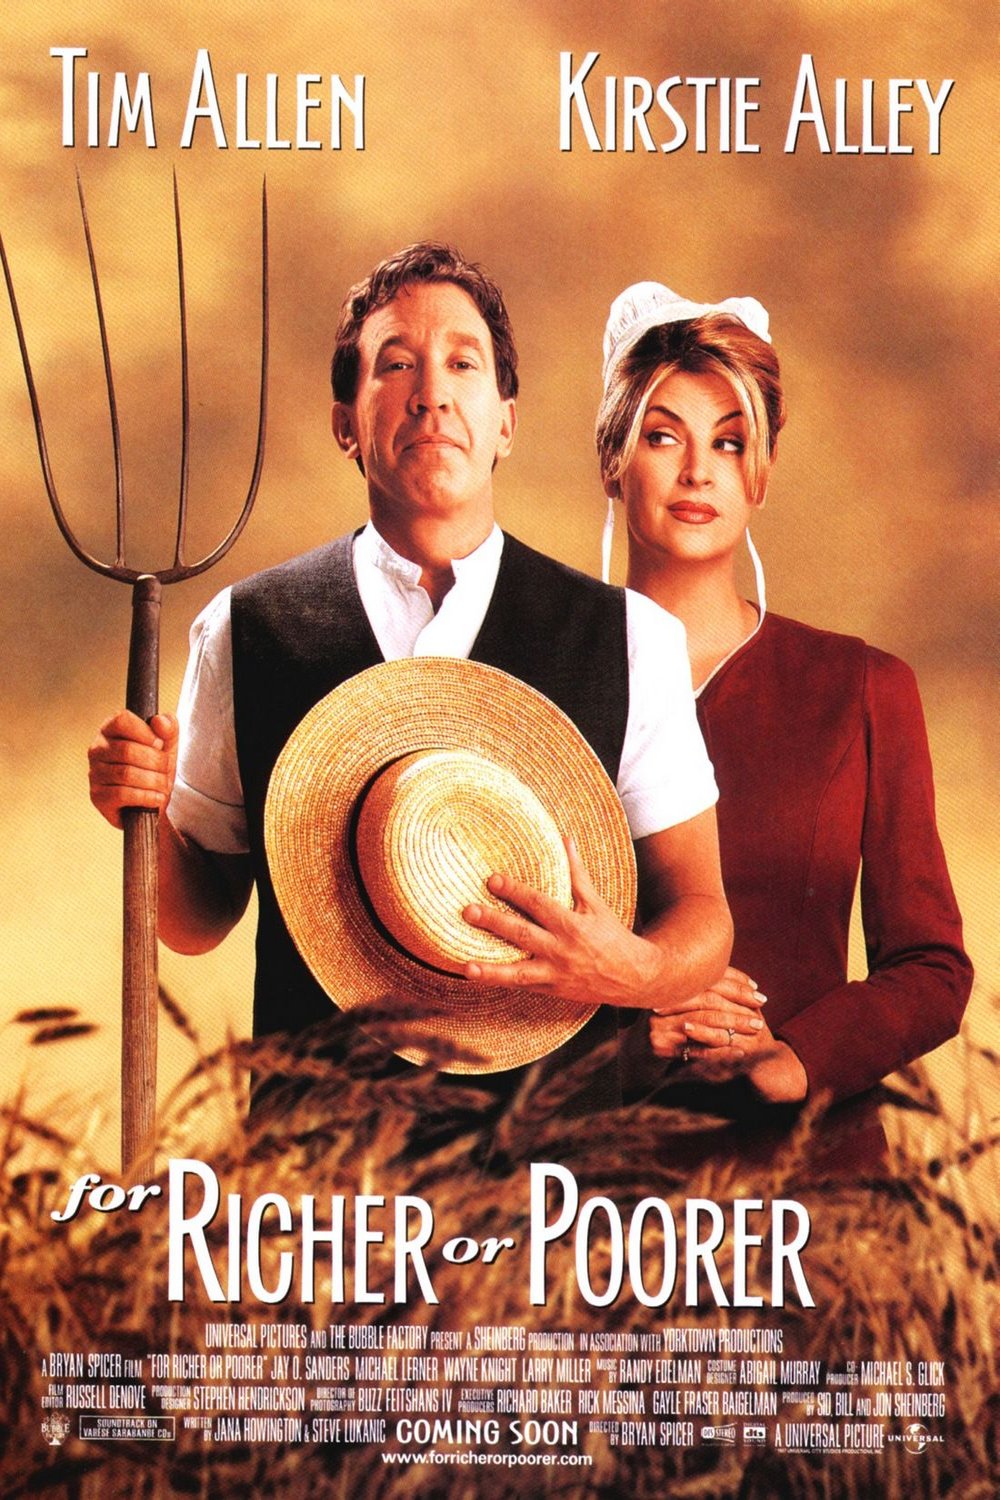 Poster of the movie For Richer or Poorer